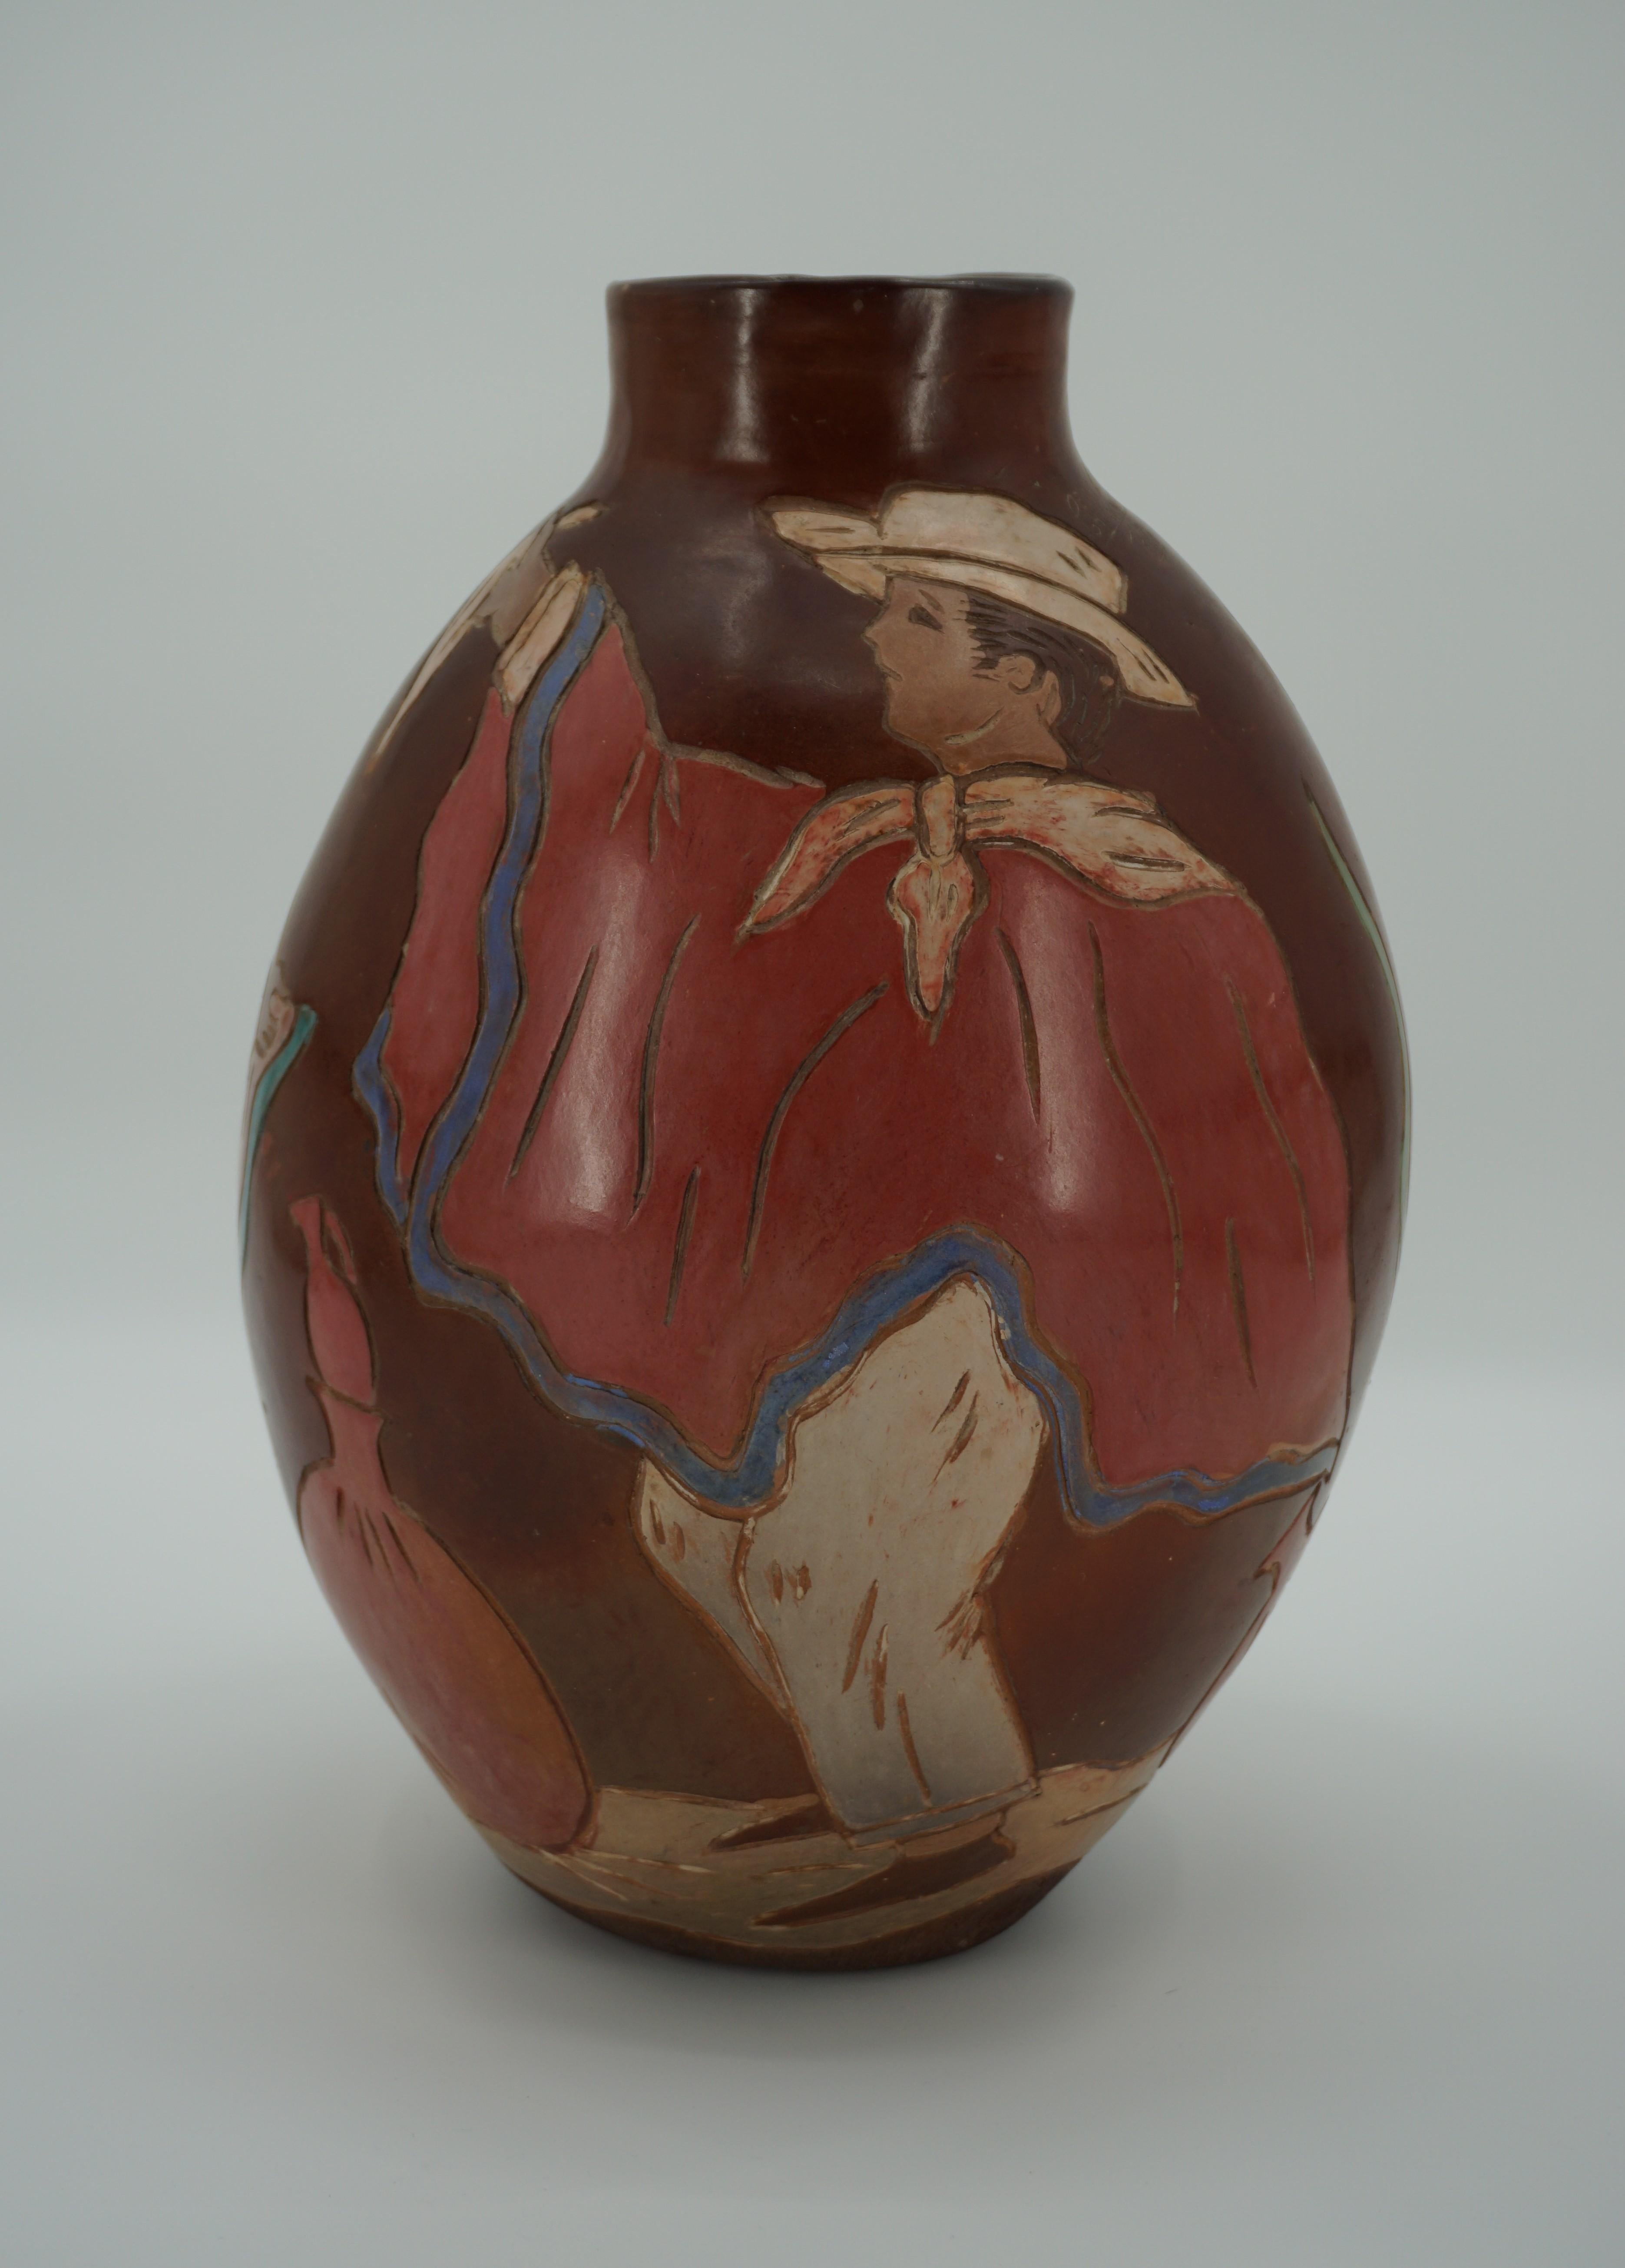 Decorative vase by Cesar Alache, in Chulucanas, Peru. Decoration of dancers of a man and a woman around the beautiful ceramic vase.